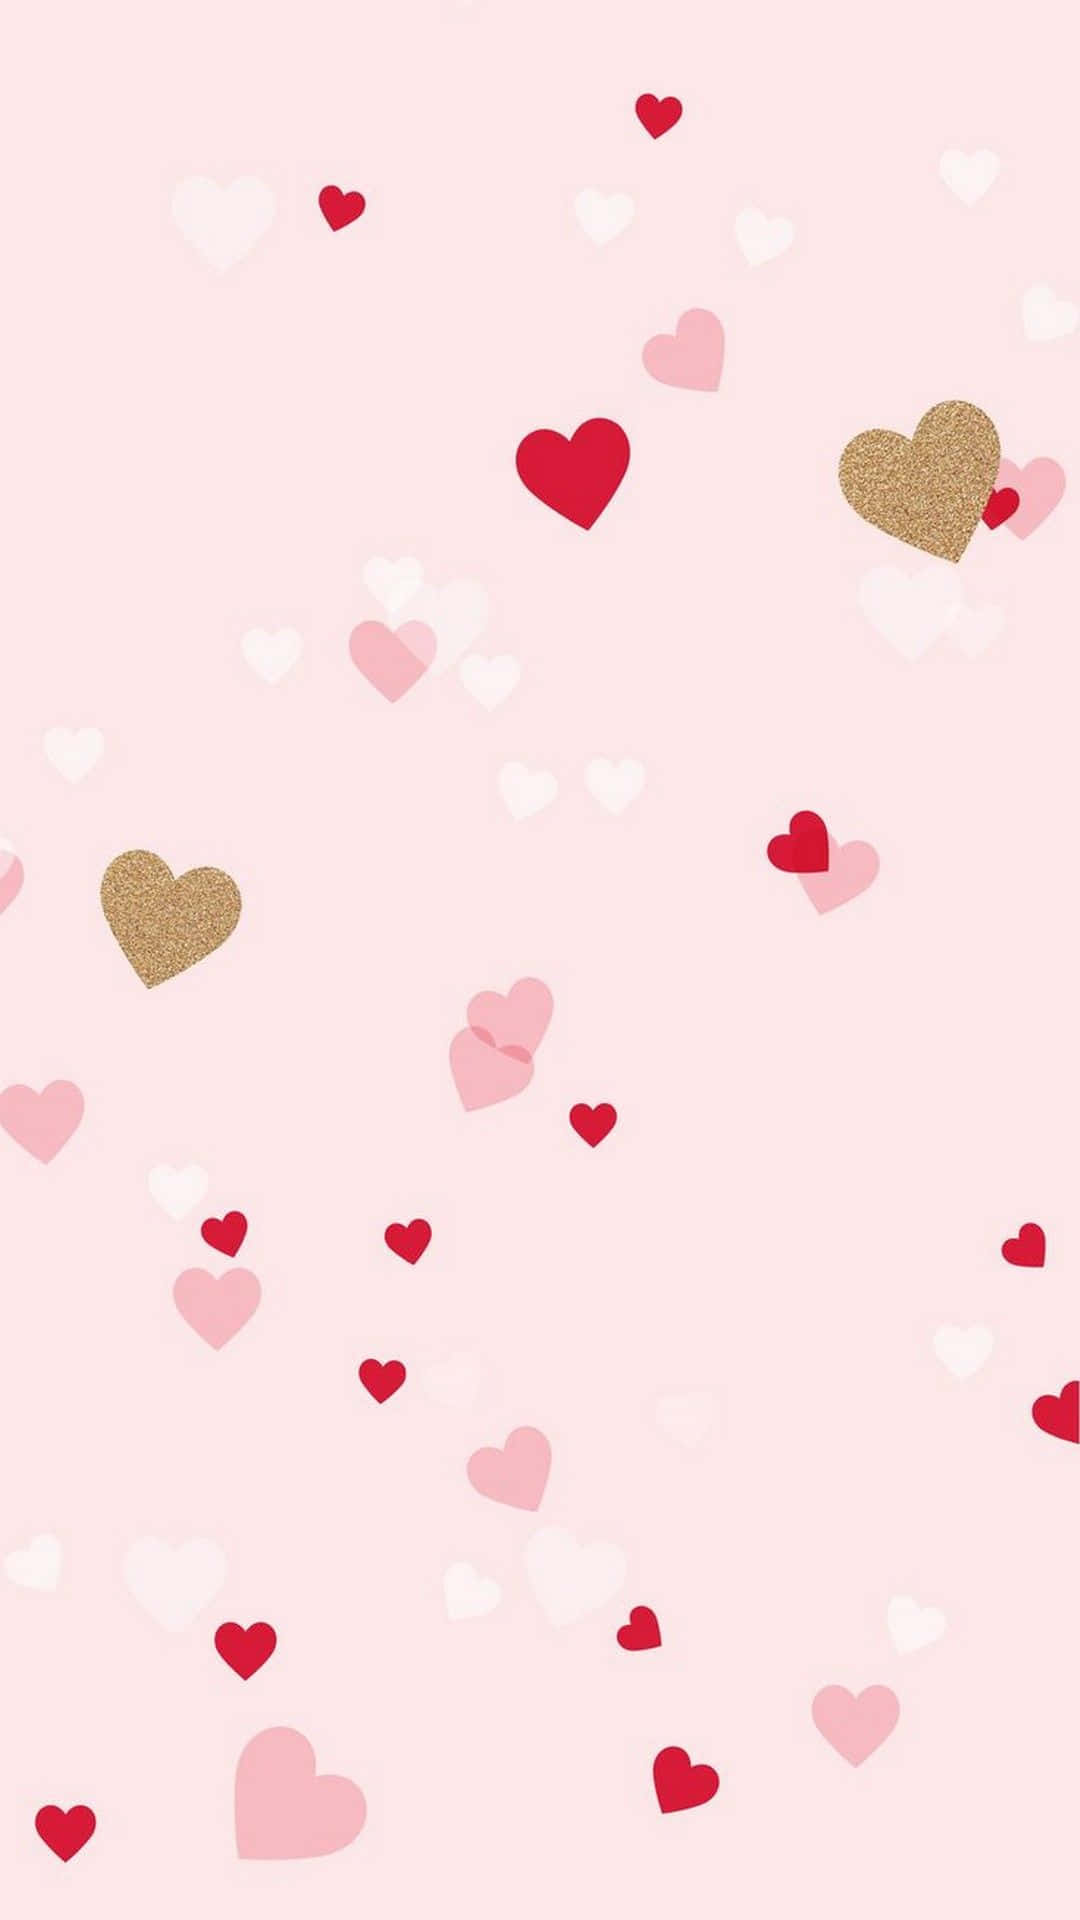 Show Your Valentine Some Love This Year With A Touch Of Cuteness. Background